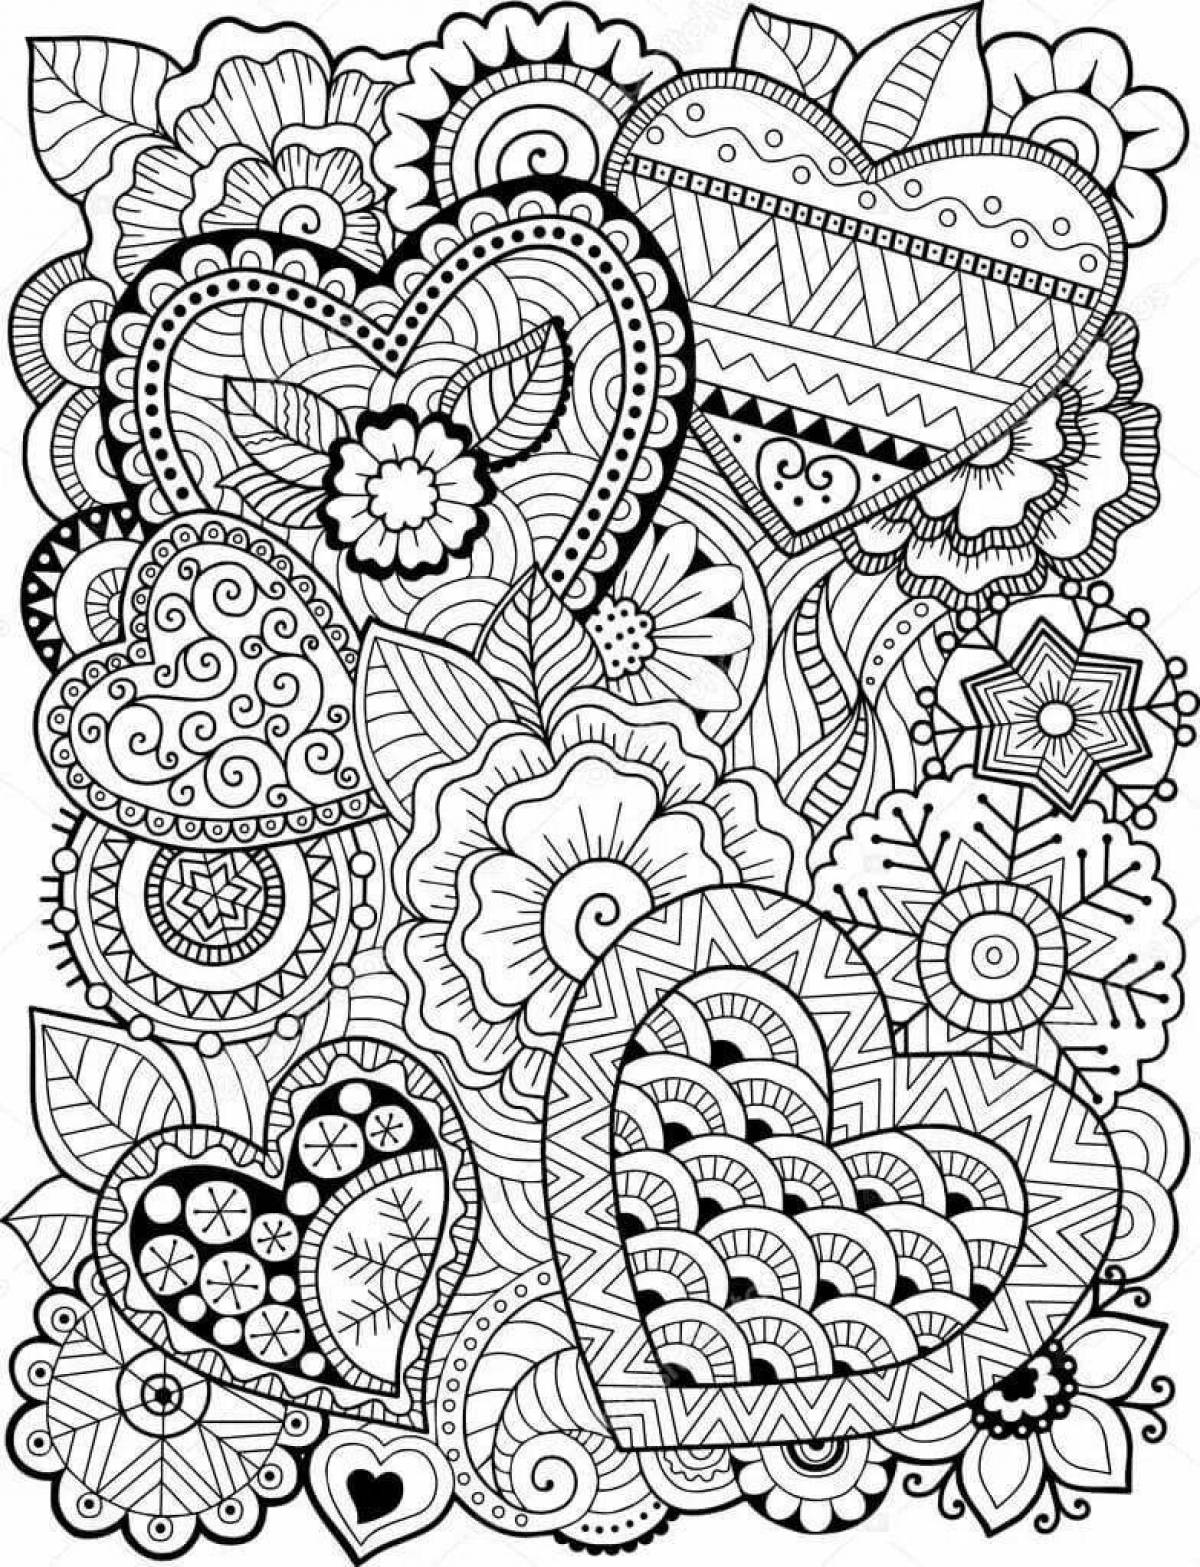 Inspiring anti-stress coloring book for girls 10-12 years old